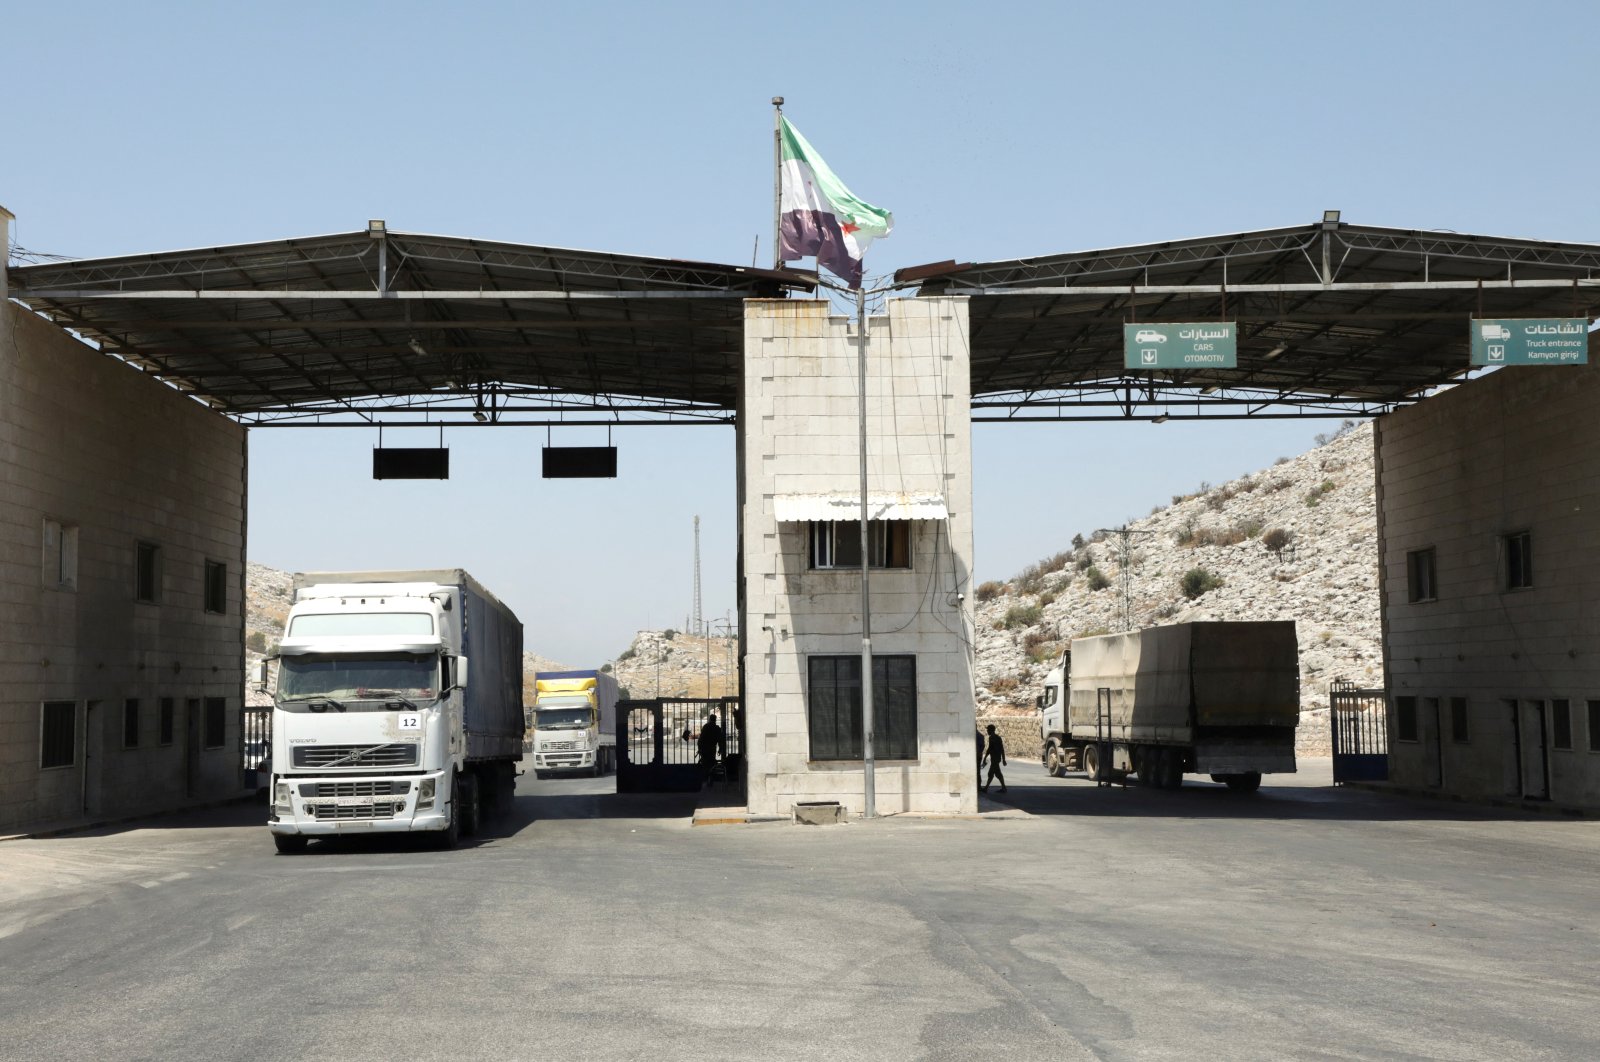 Trucks drive past the Bab al-Hawa crossing at the Turkish-Syrian border, in Idlib governorate, Syria, June 30, 2021. (Reuters Photo)